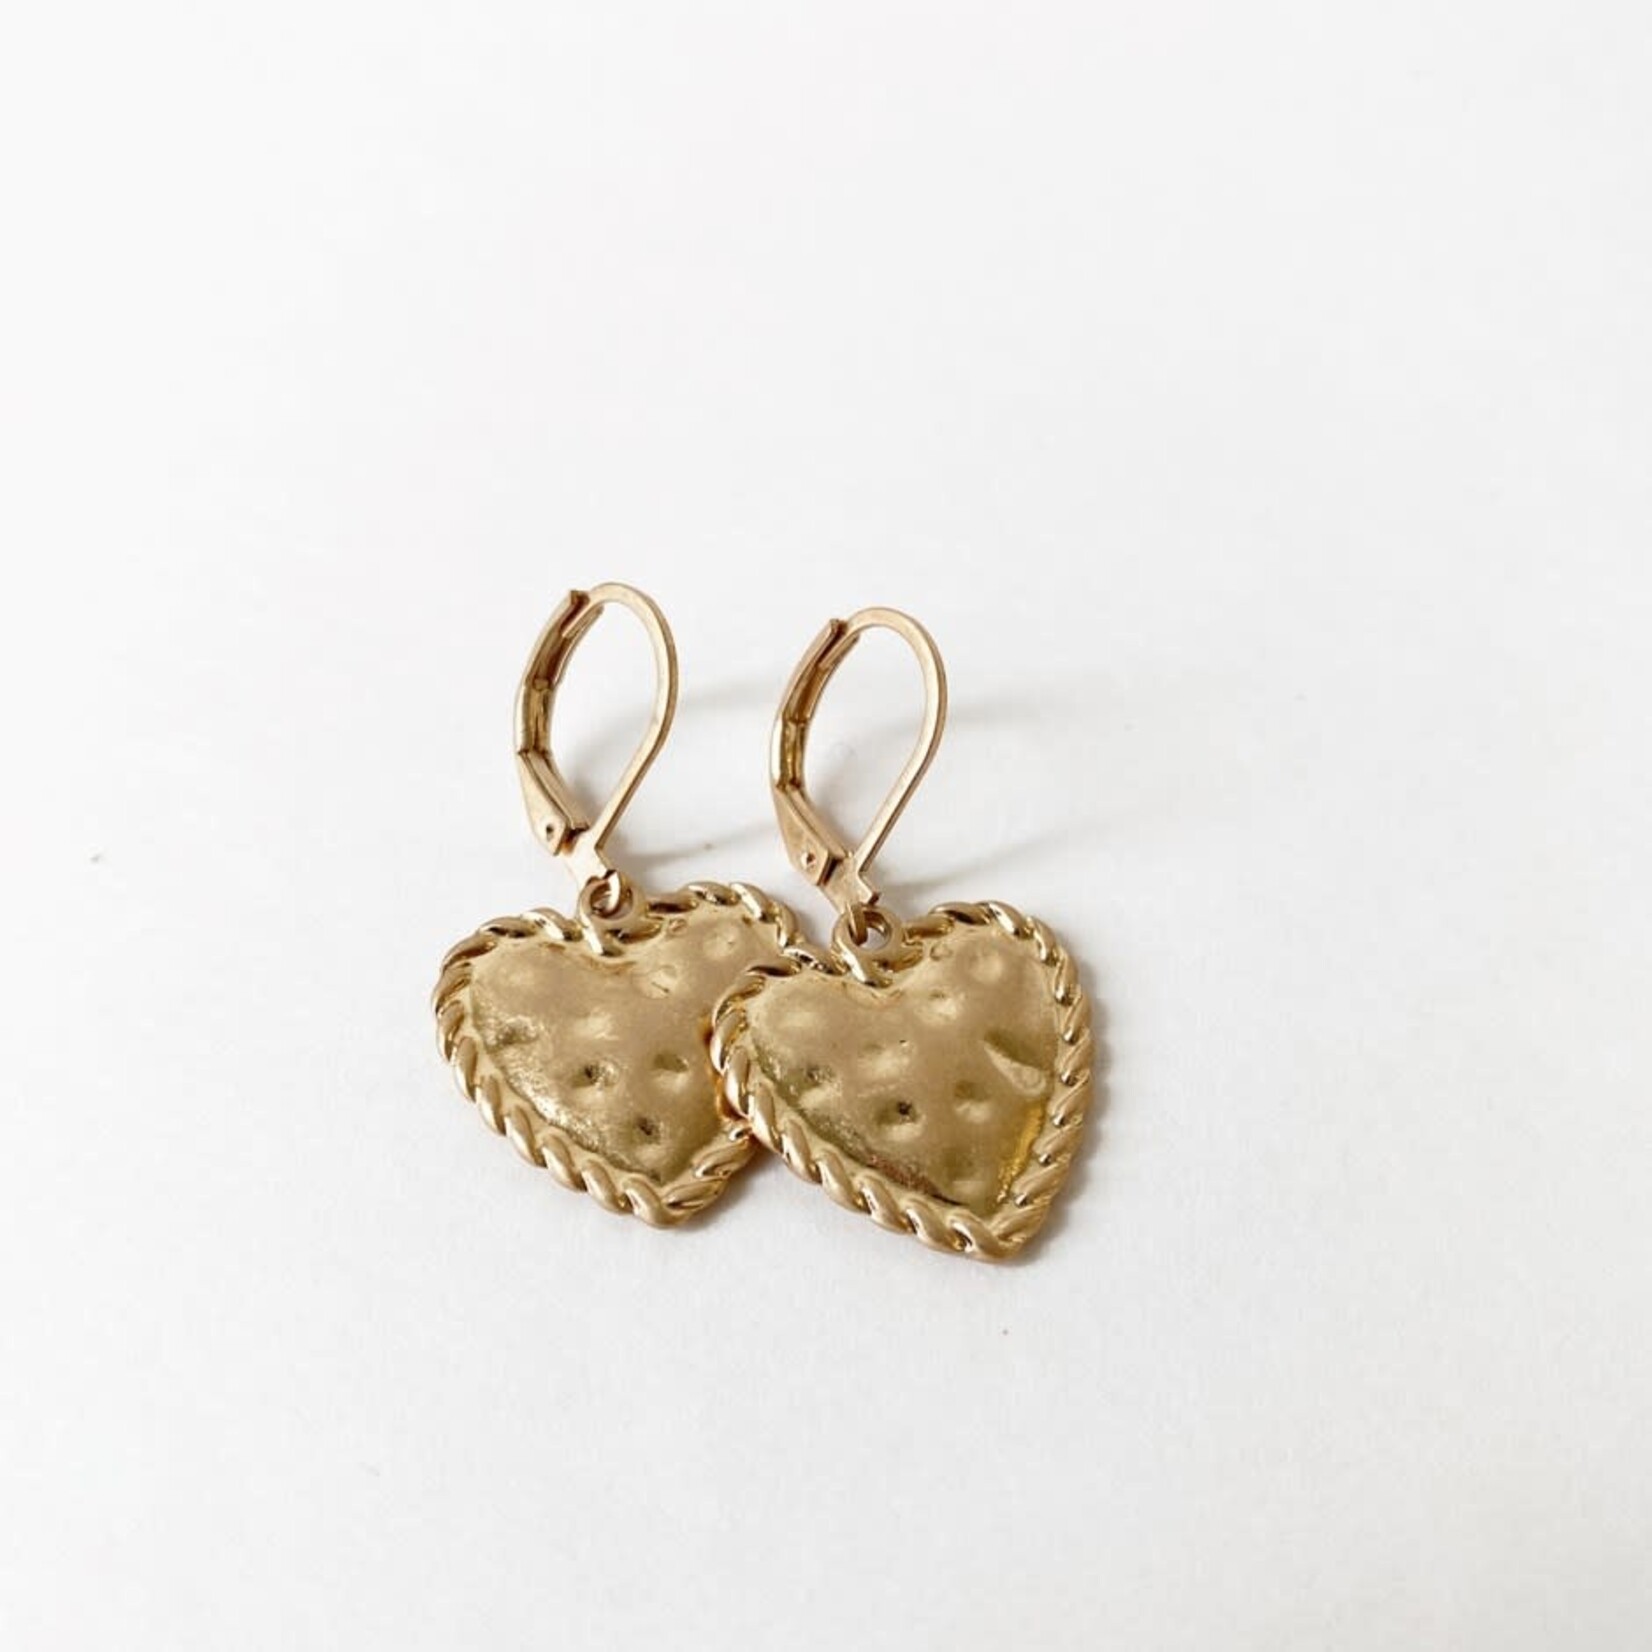 Antique Finished Heart Earrings - Gold